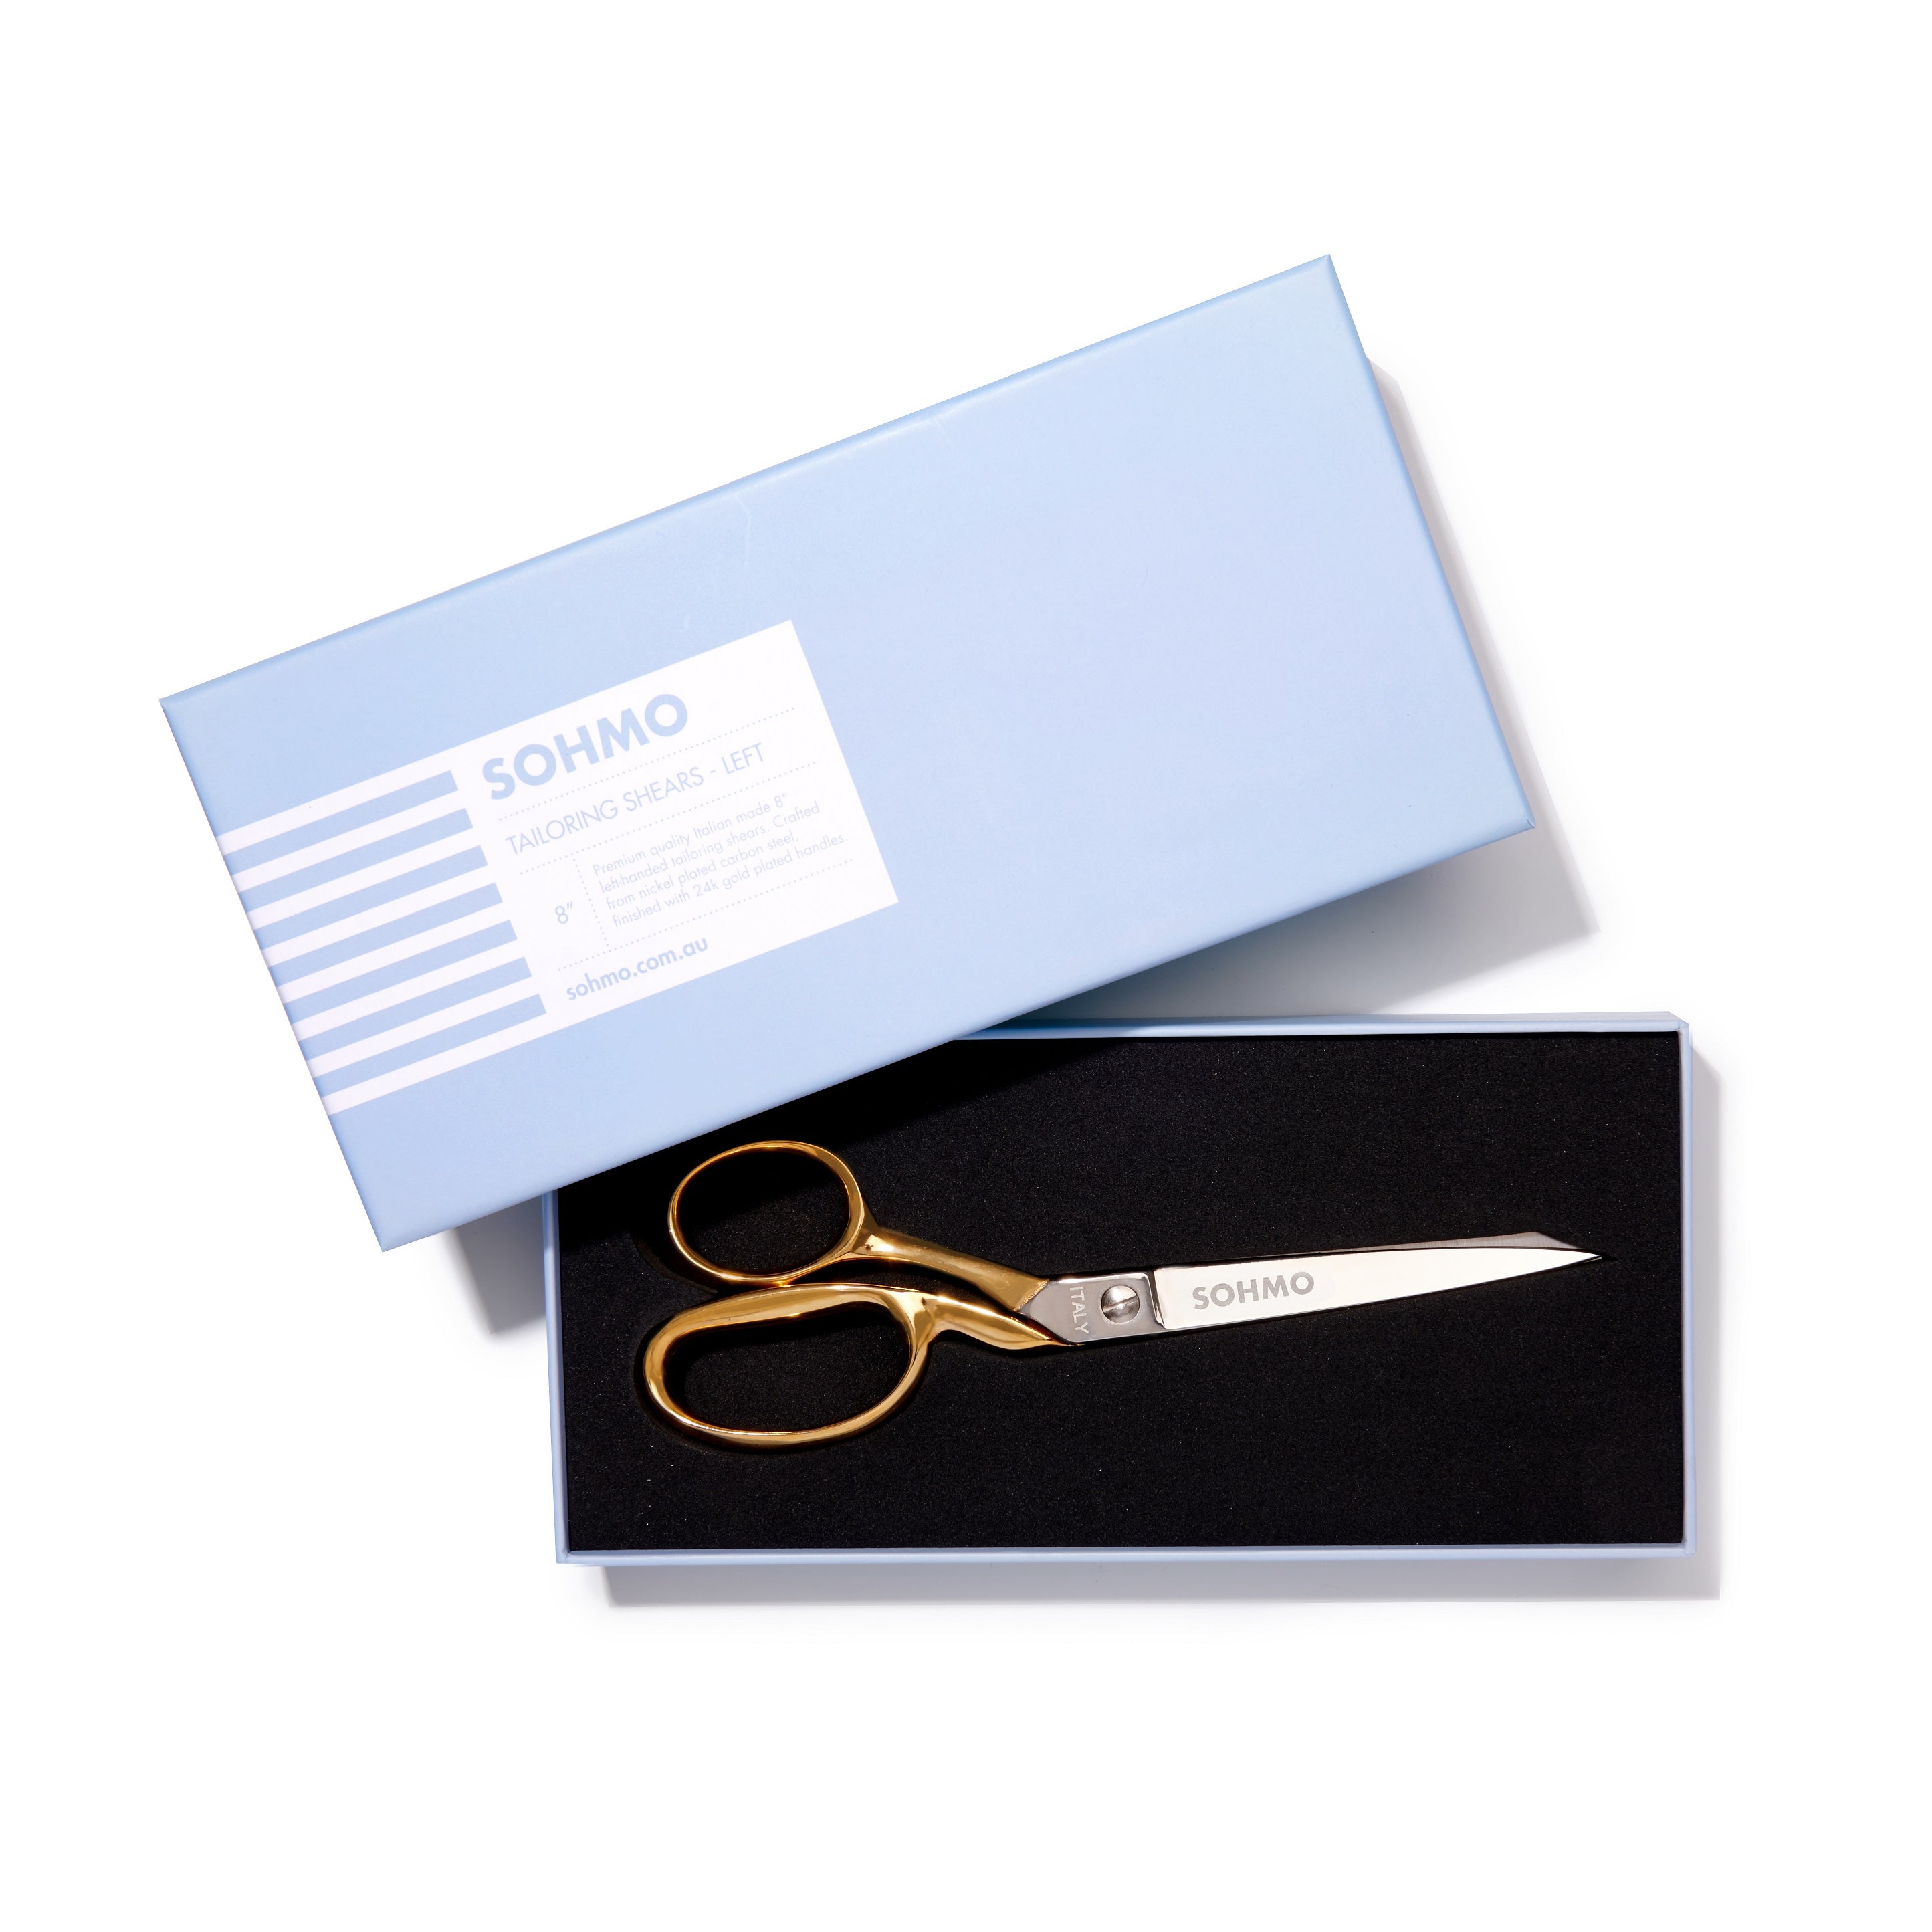 SOHMO left handed sewing scissors in blue box